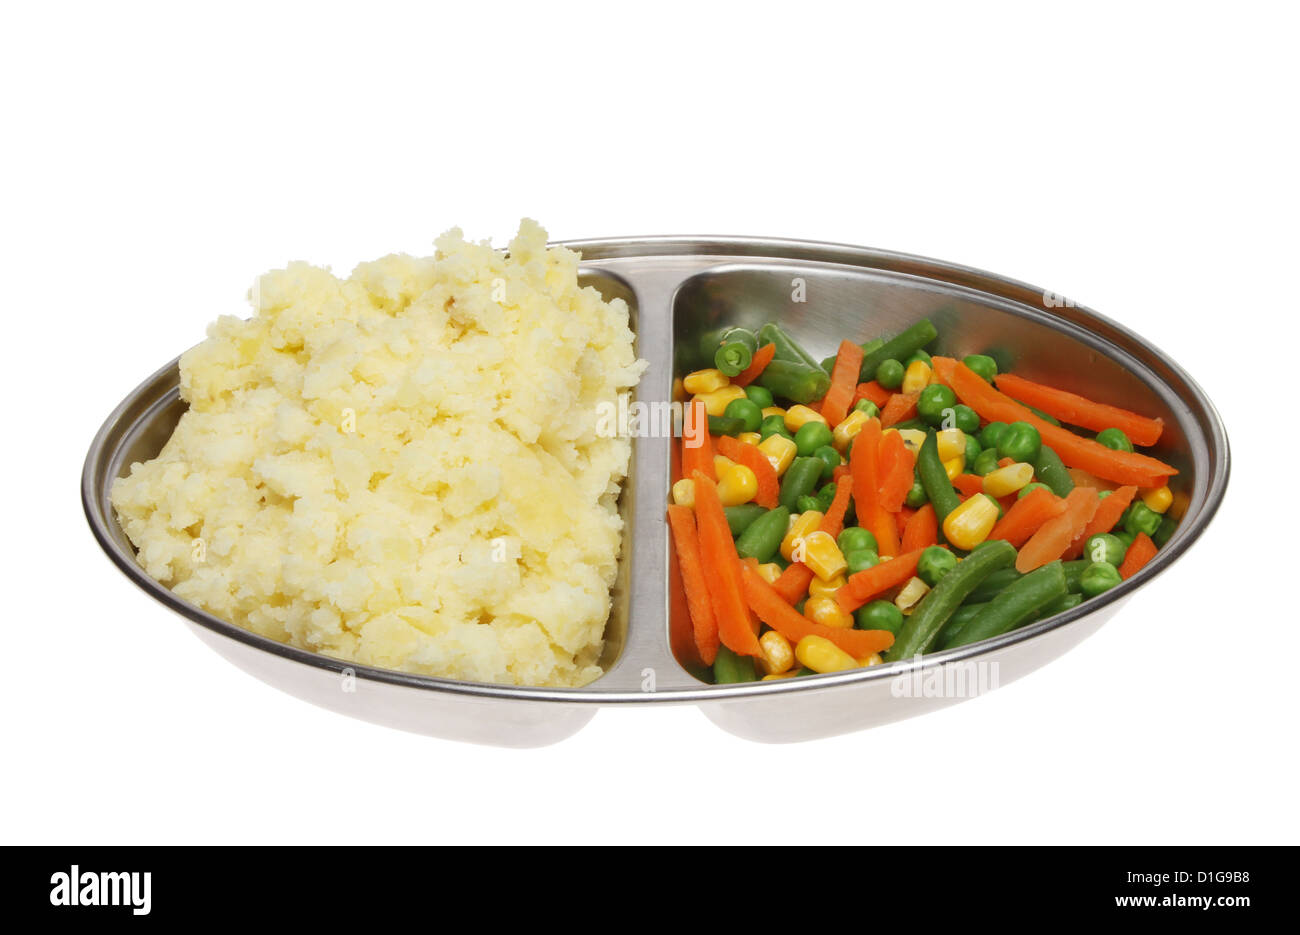 Mashed potato and mixed vegetables in a serving dish isolated against white Stock Photo